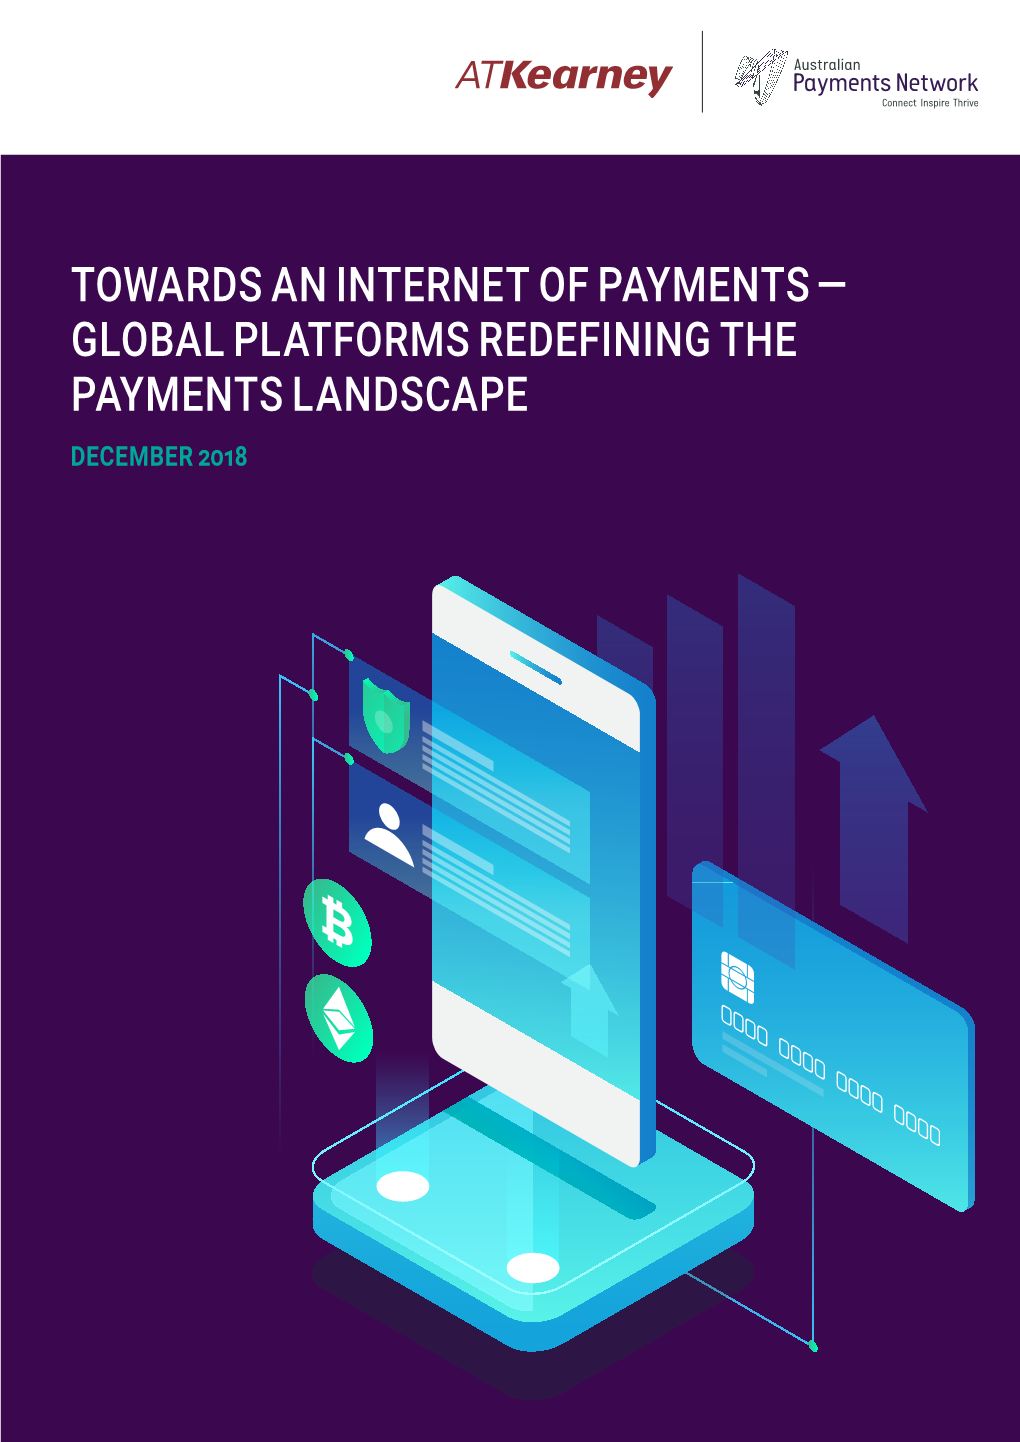 Towards an Internet of Payments — Global Platforms Redefining the Payments Landscape December 2018